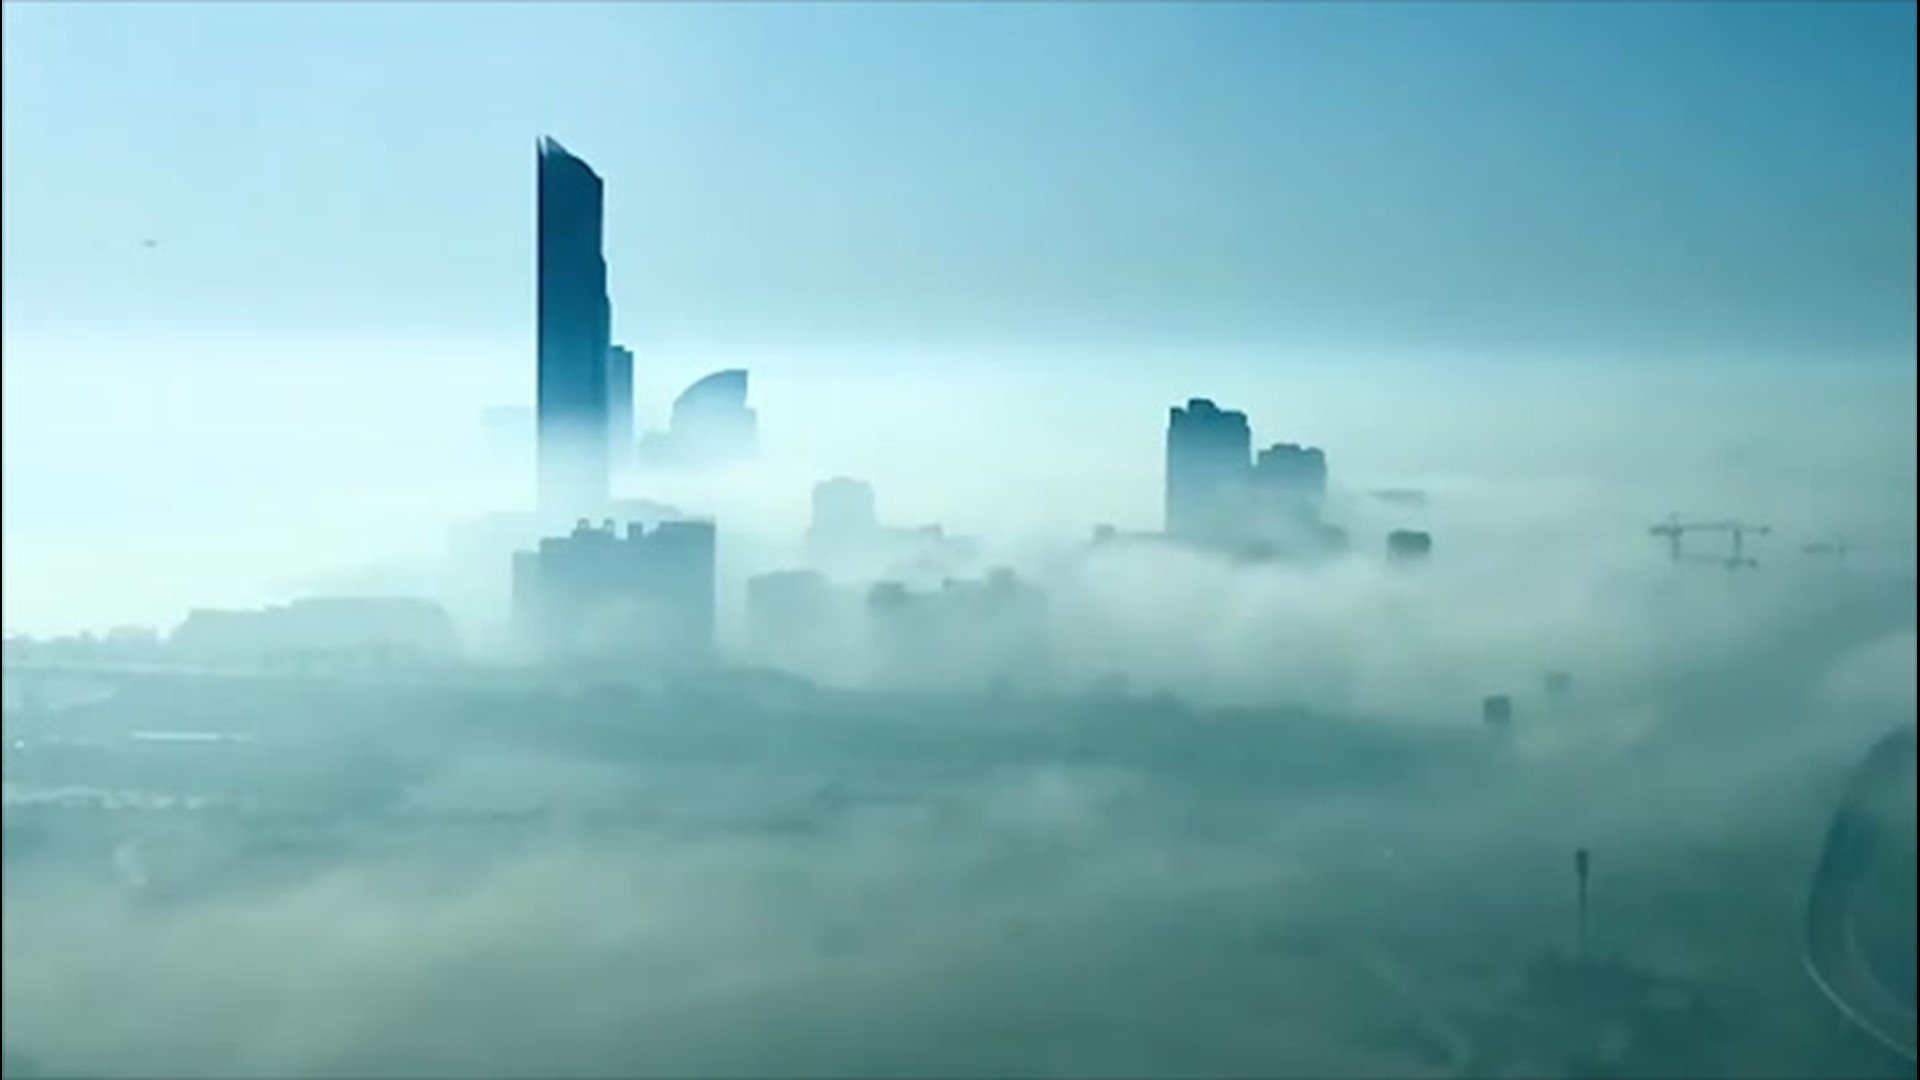 A stunning time-lapse video shows clouds rolling through Dubai, United Arab Emirates, in the early morning hours on Sept. 22.